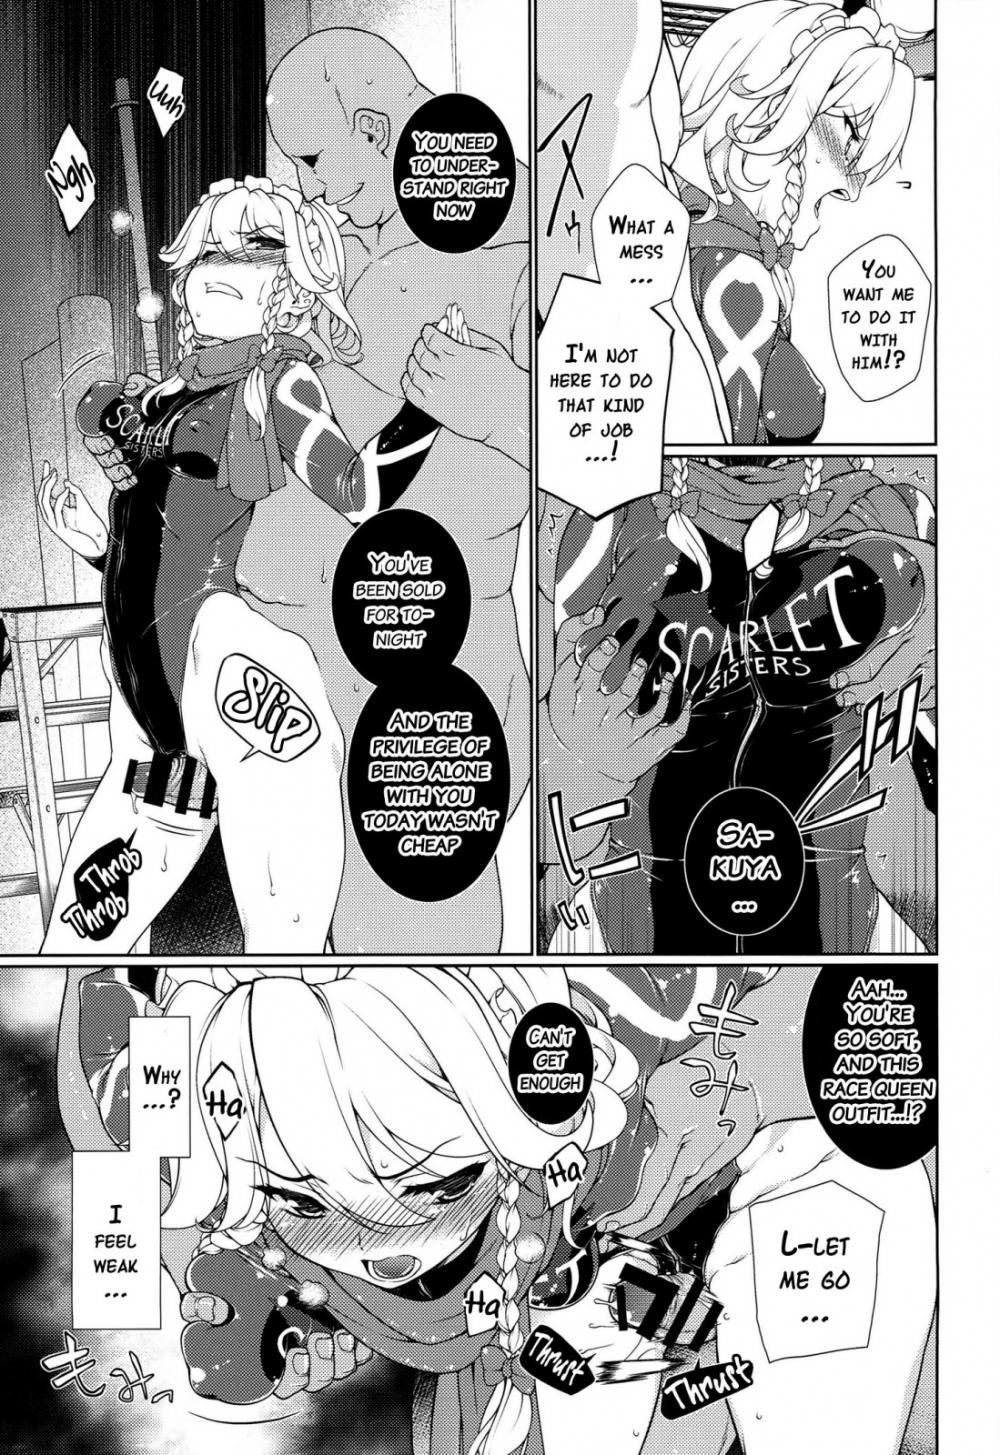 Hentai Manga Comic-TOUHOU RACE QUEENS COLLABO CLUB -SCARLET SISTERS--Chapter 5-3